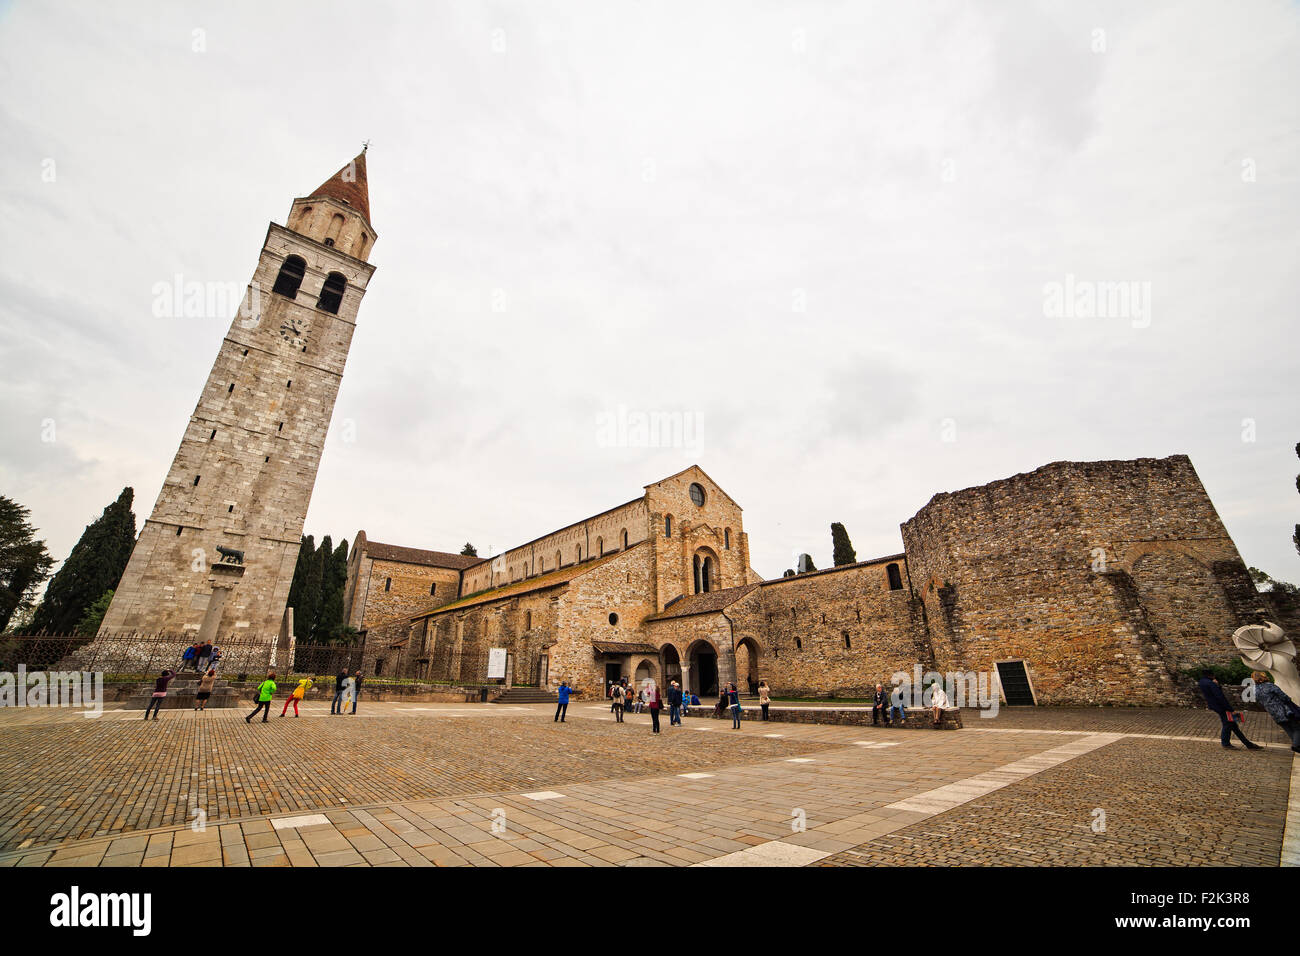 View of Basilica di Santa Maria Assunta and bell tower of Aquileia, Italy. Aquileia is UNESCO World Heritage Site Stock Photo